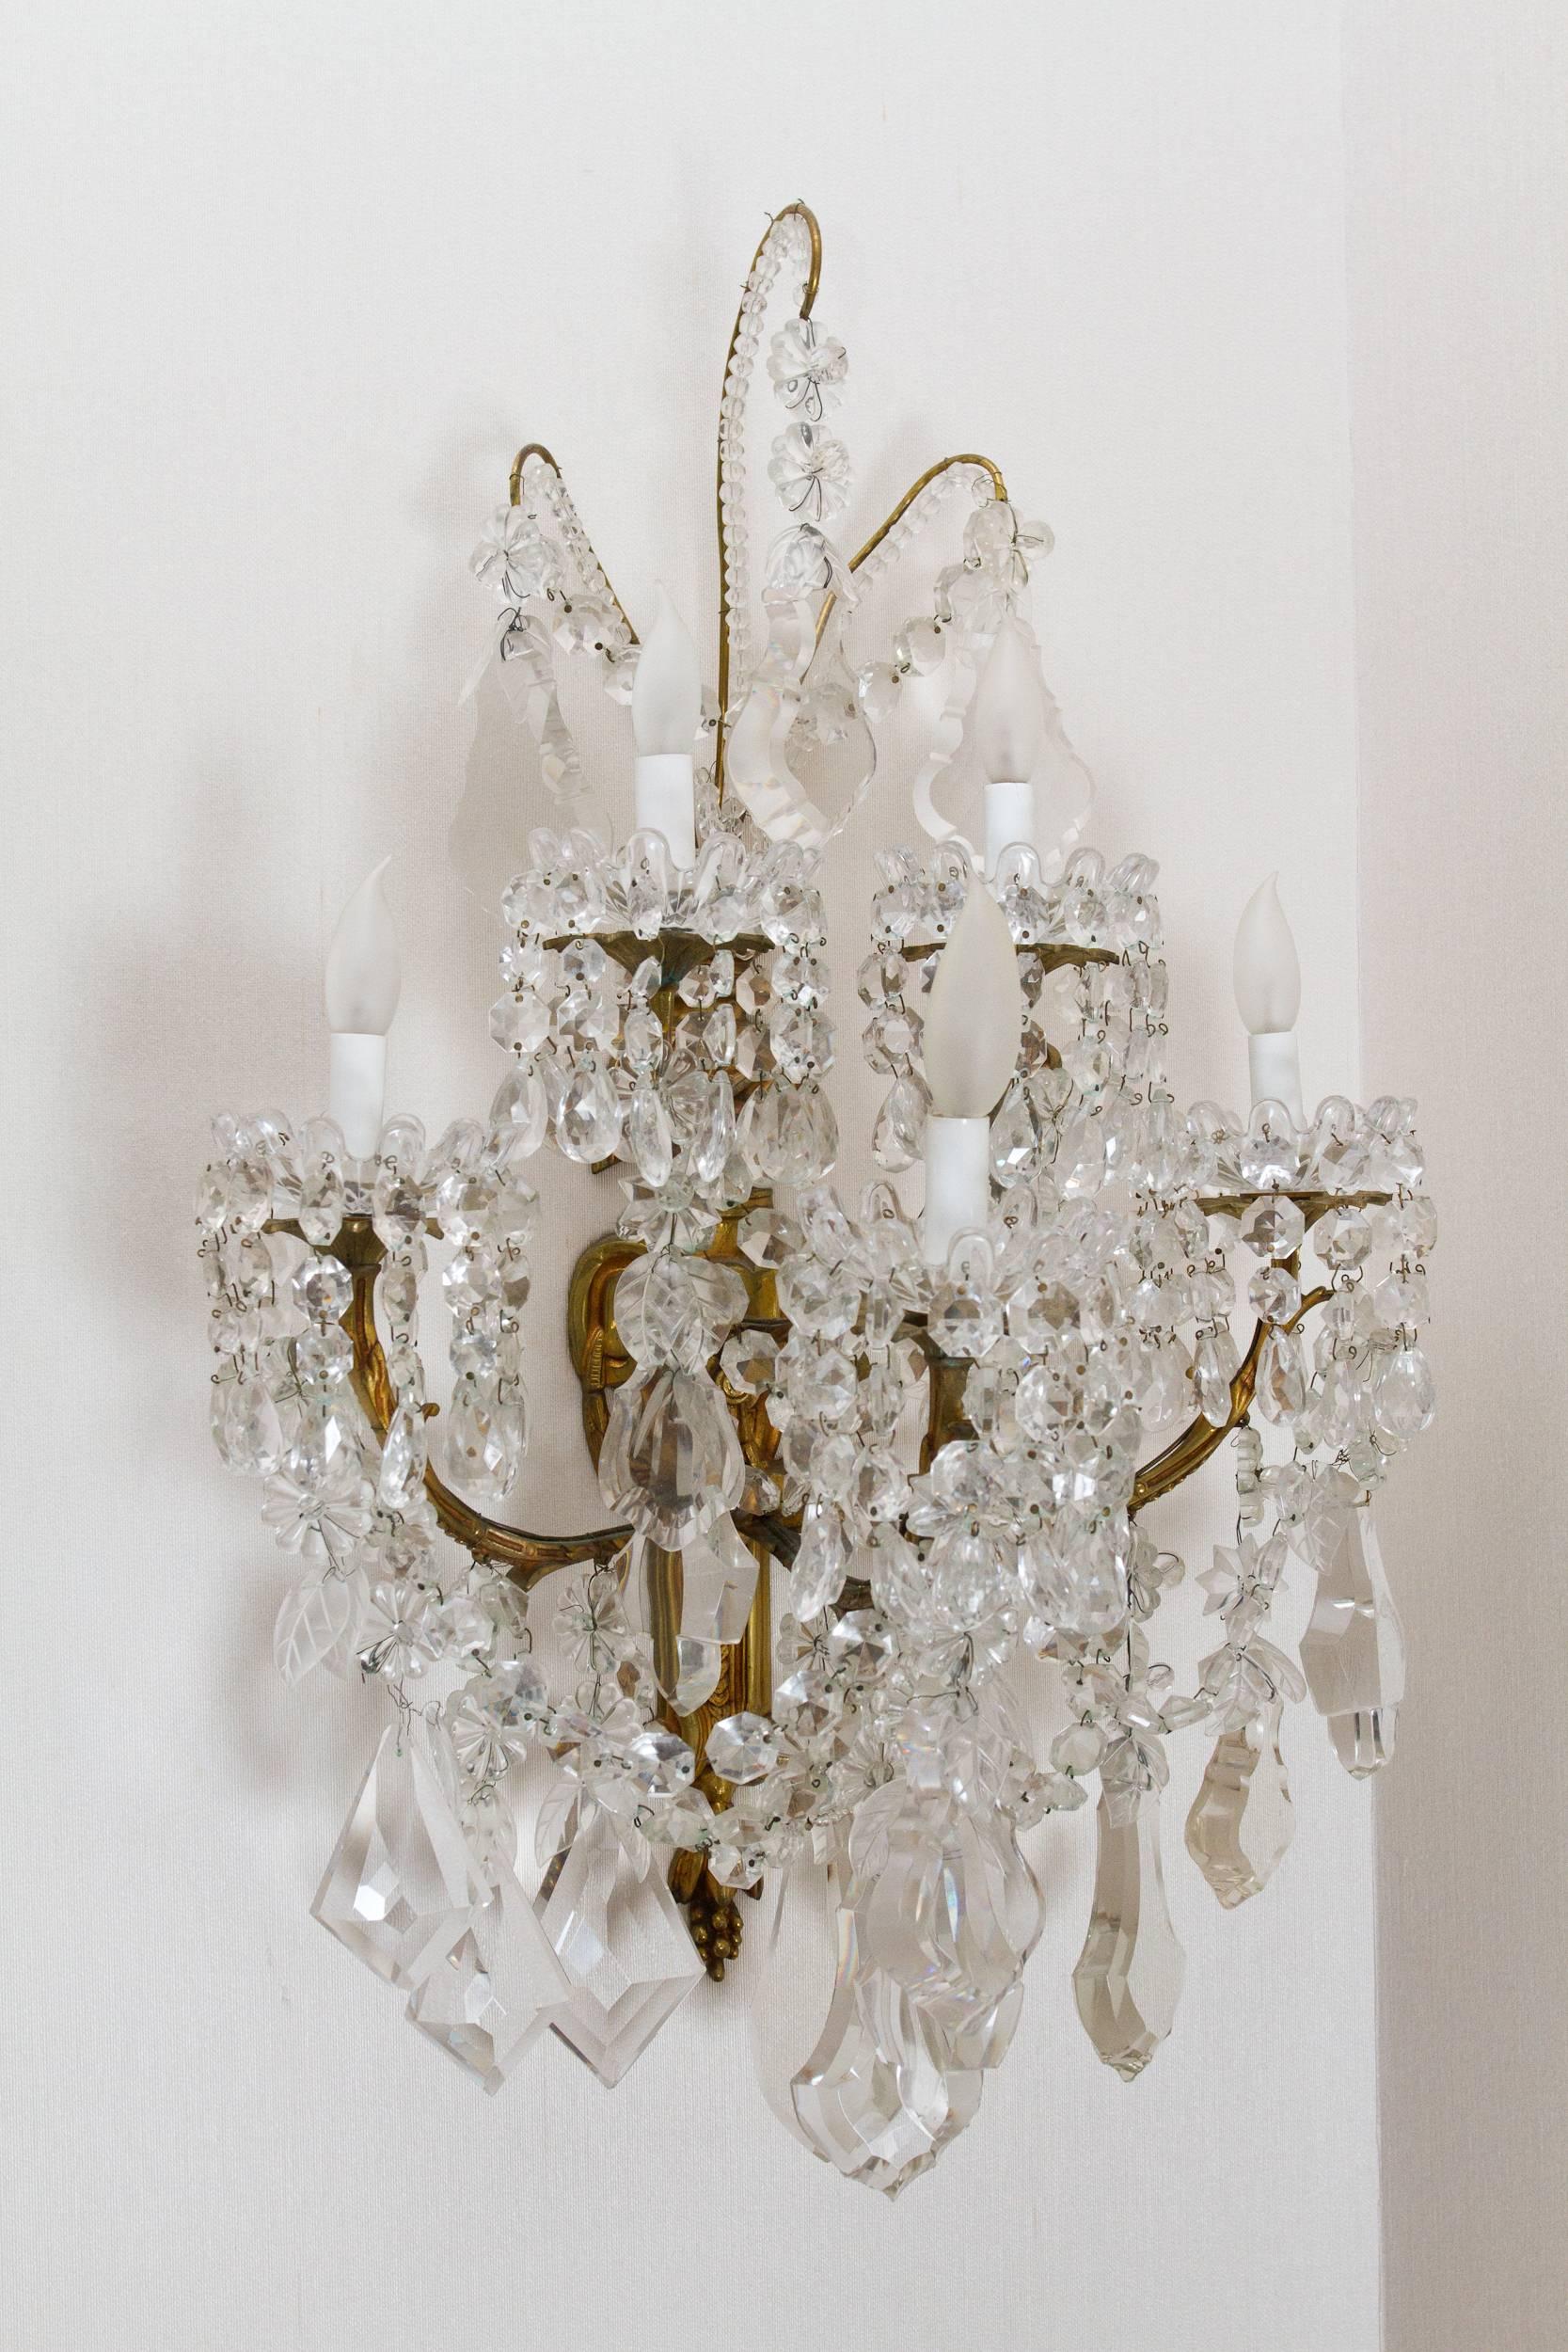 Stunning Pair of Neoclassical Sconces by Baccarat In Excellent Condition For Sale In Montreal, QC